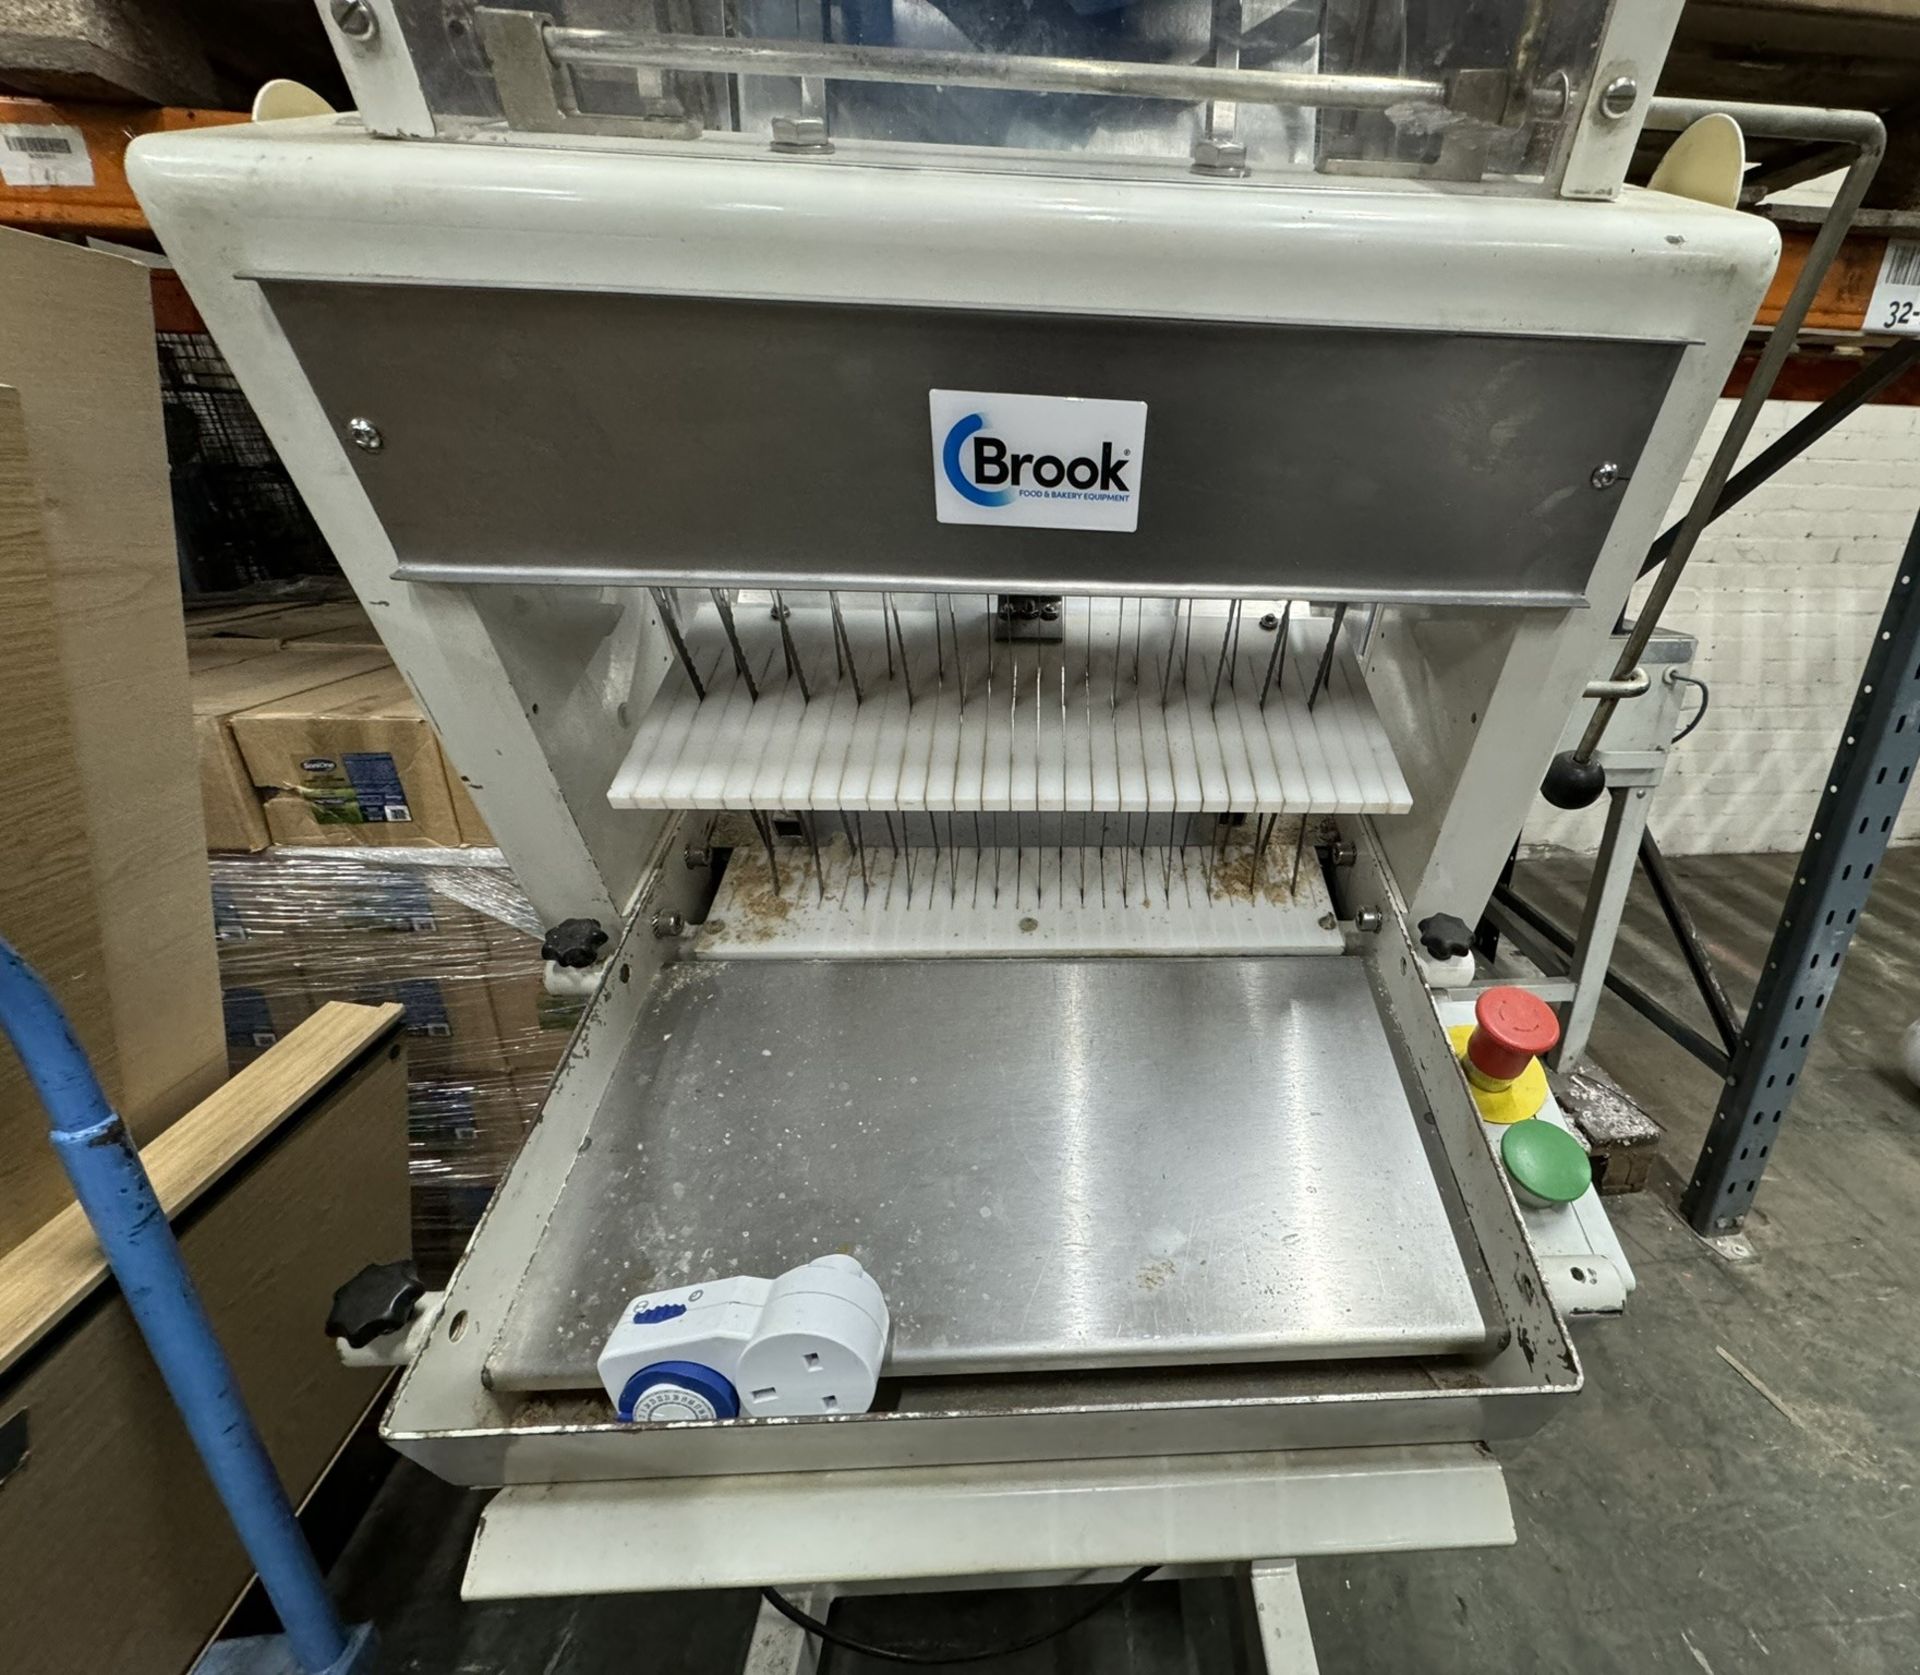 Brook 11188 Professional Automatic Bread slicer - Image 3 of 5